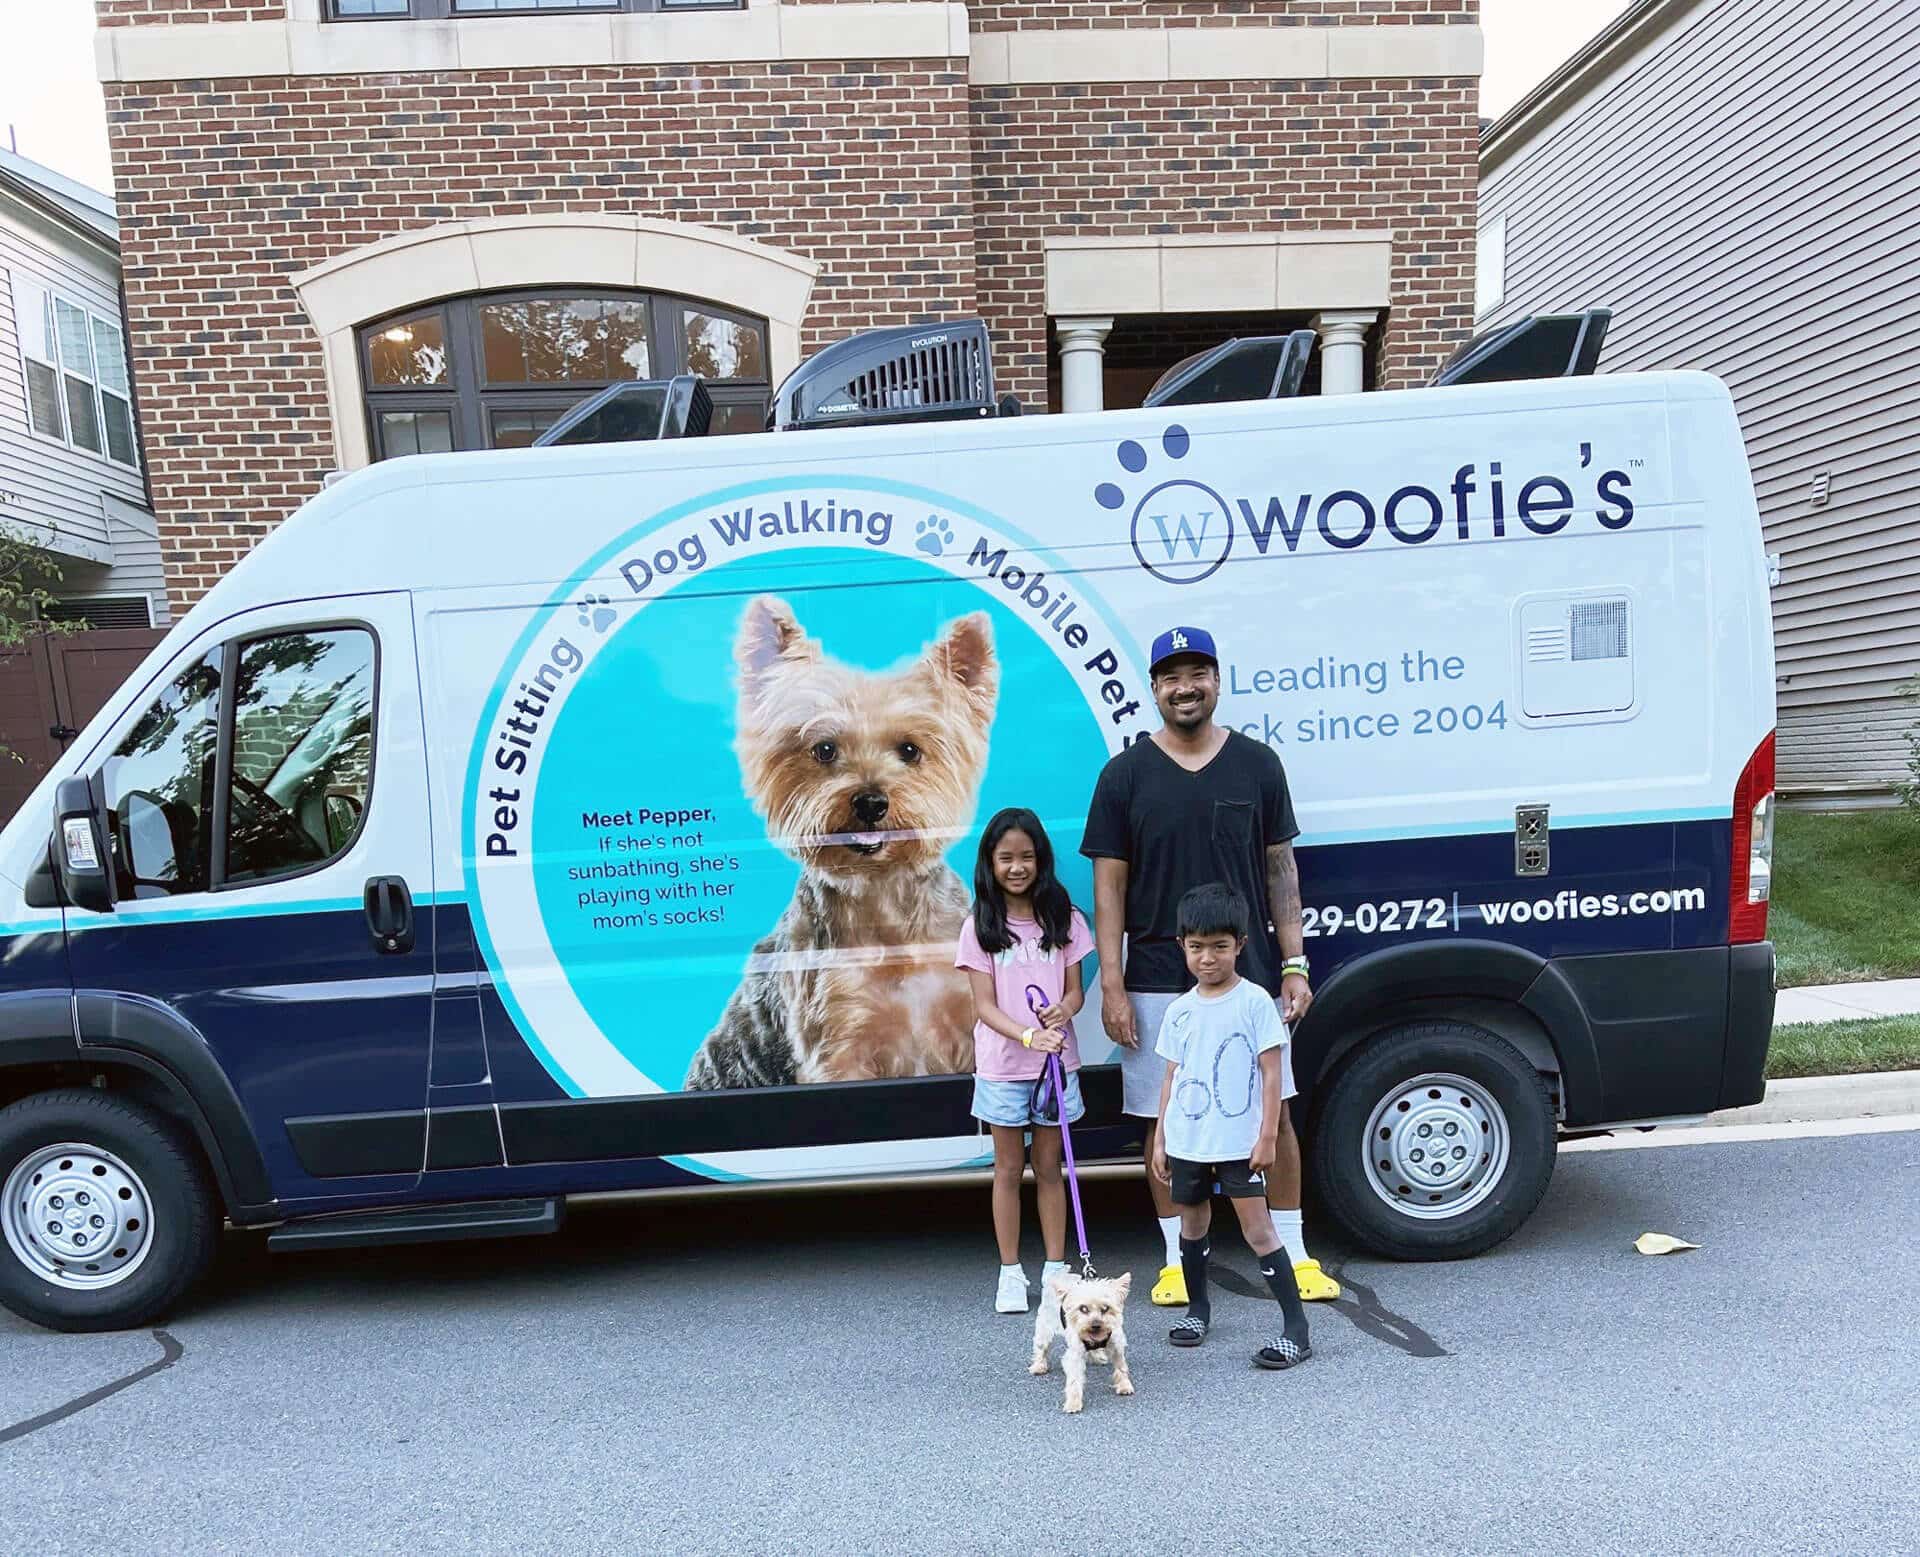 Pet Care Franchise Opportunity - Woofie's® Franchise